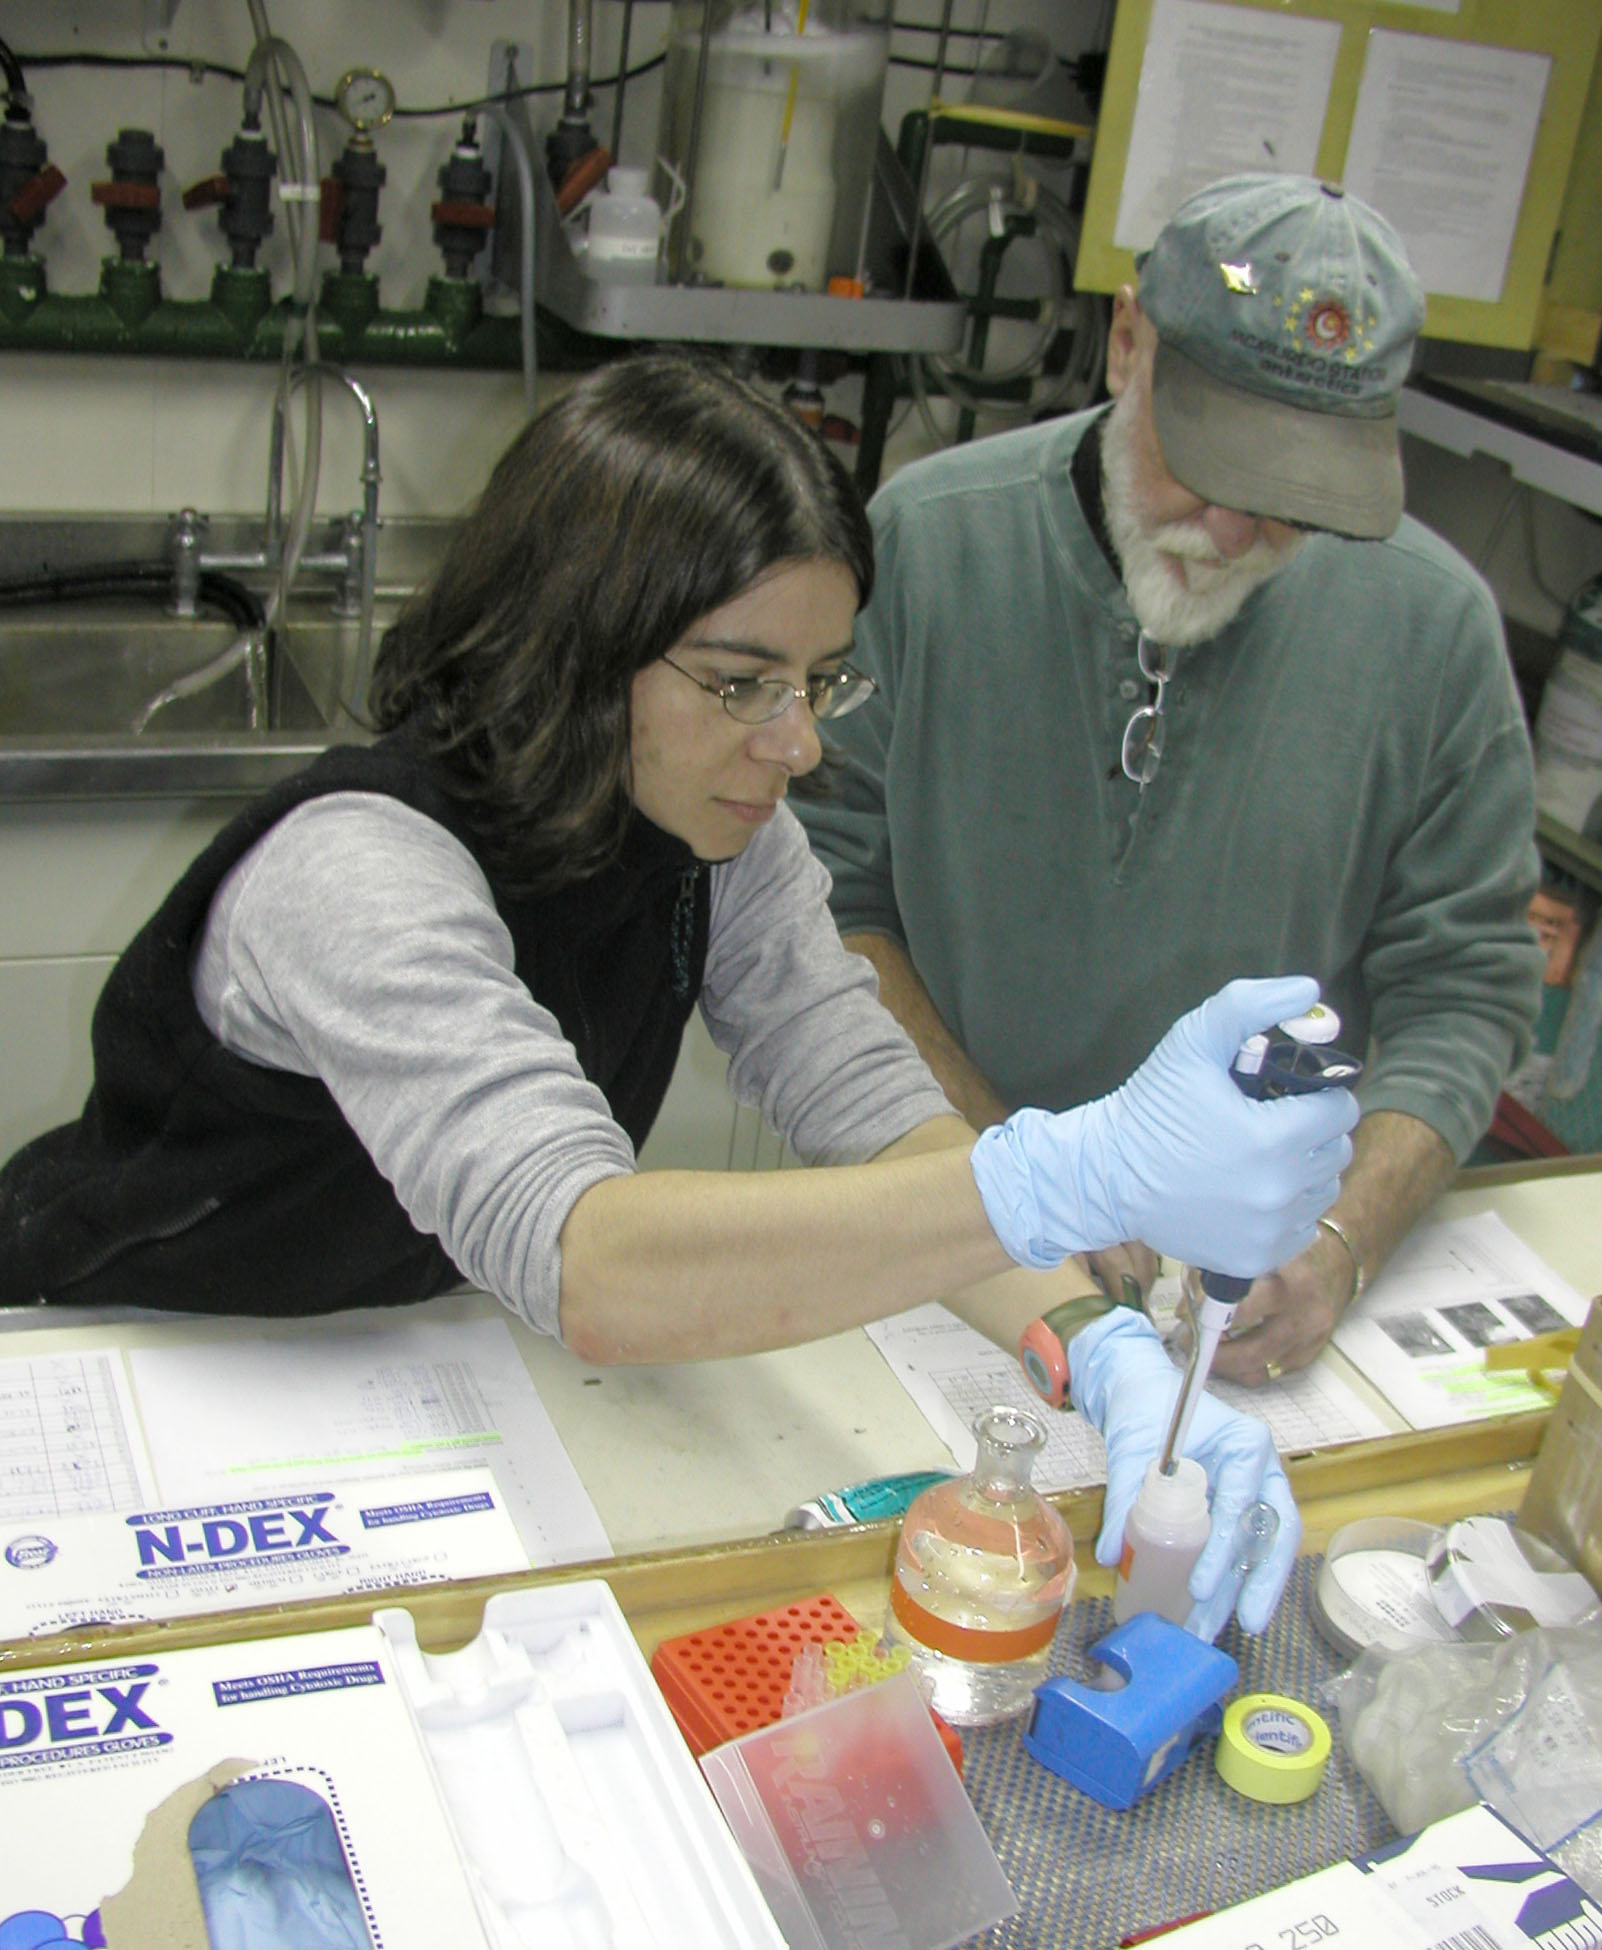 A man and a woman in a science lab.